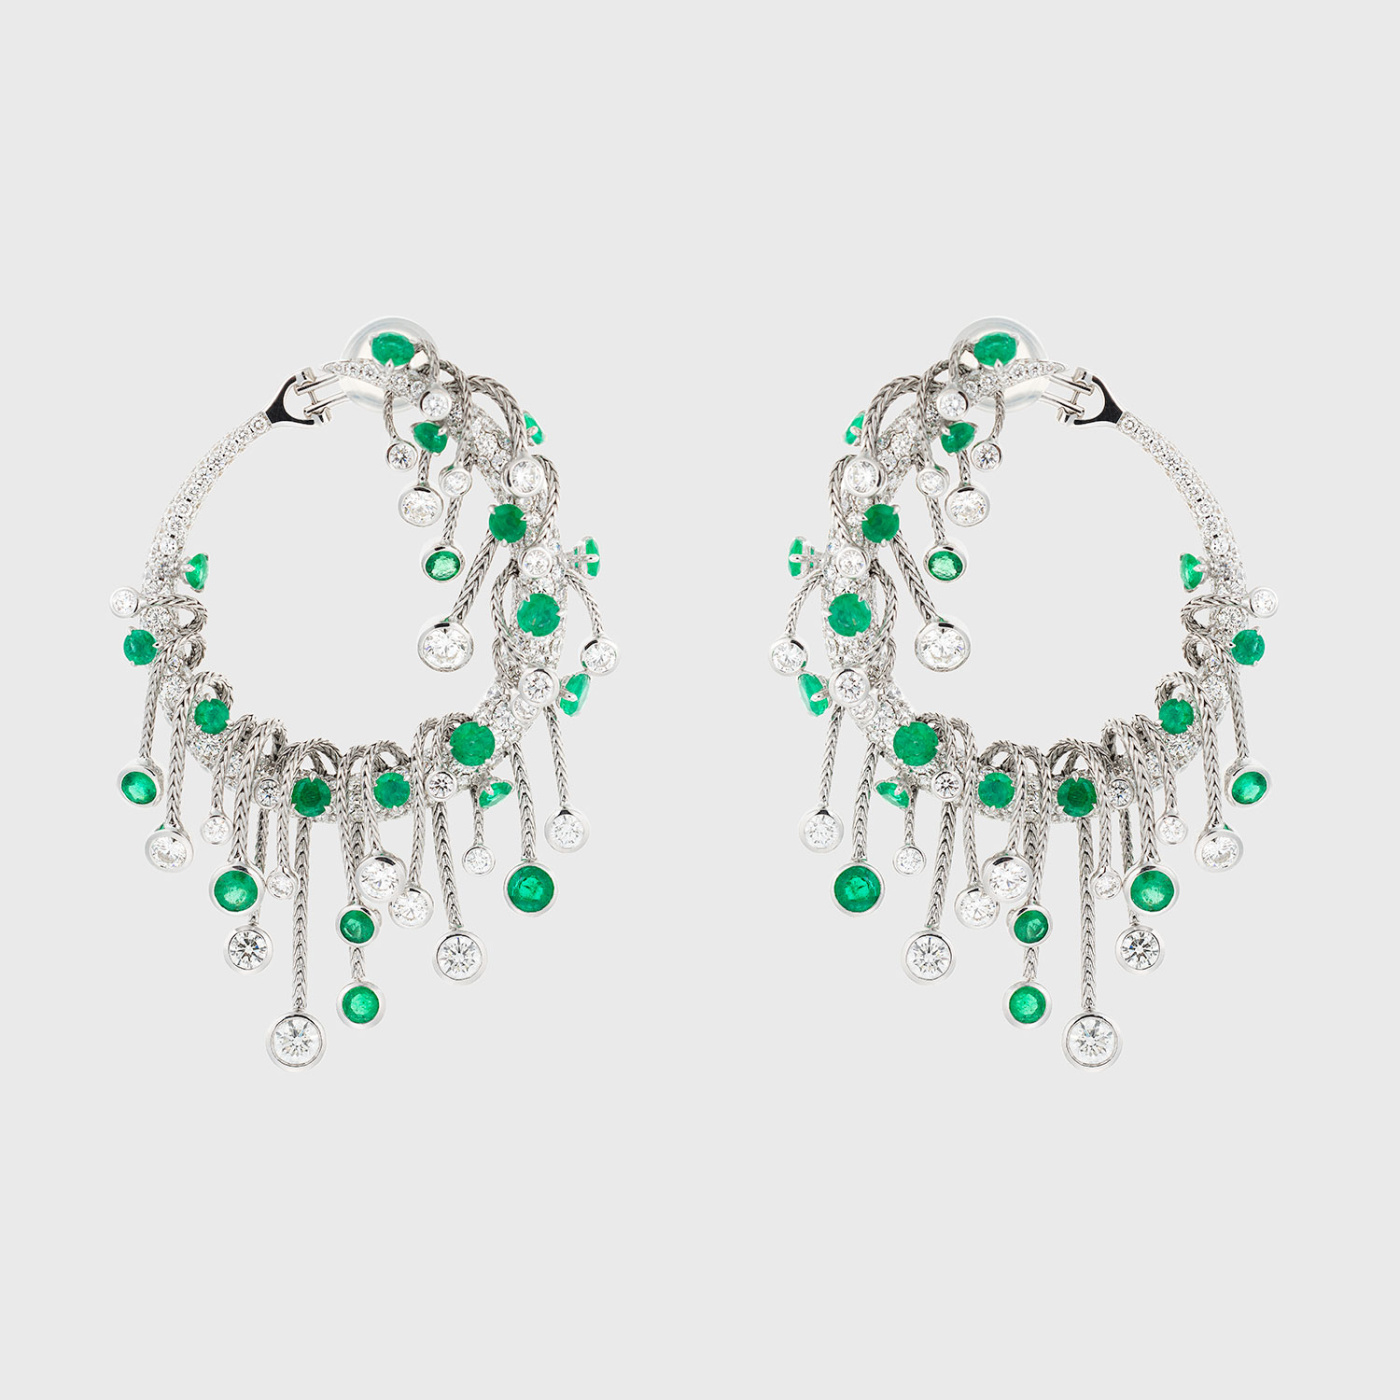 White gold earrings with white diamonds and emeralds